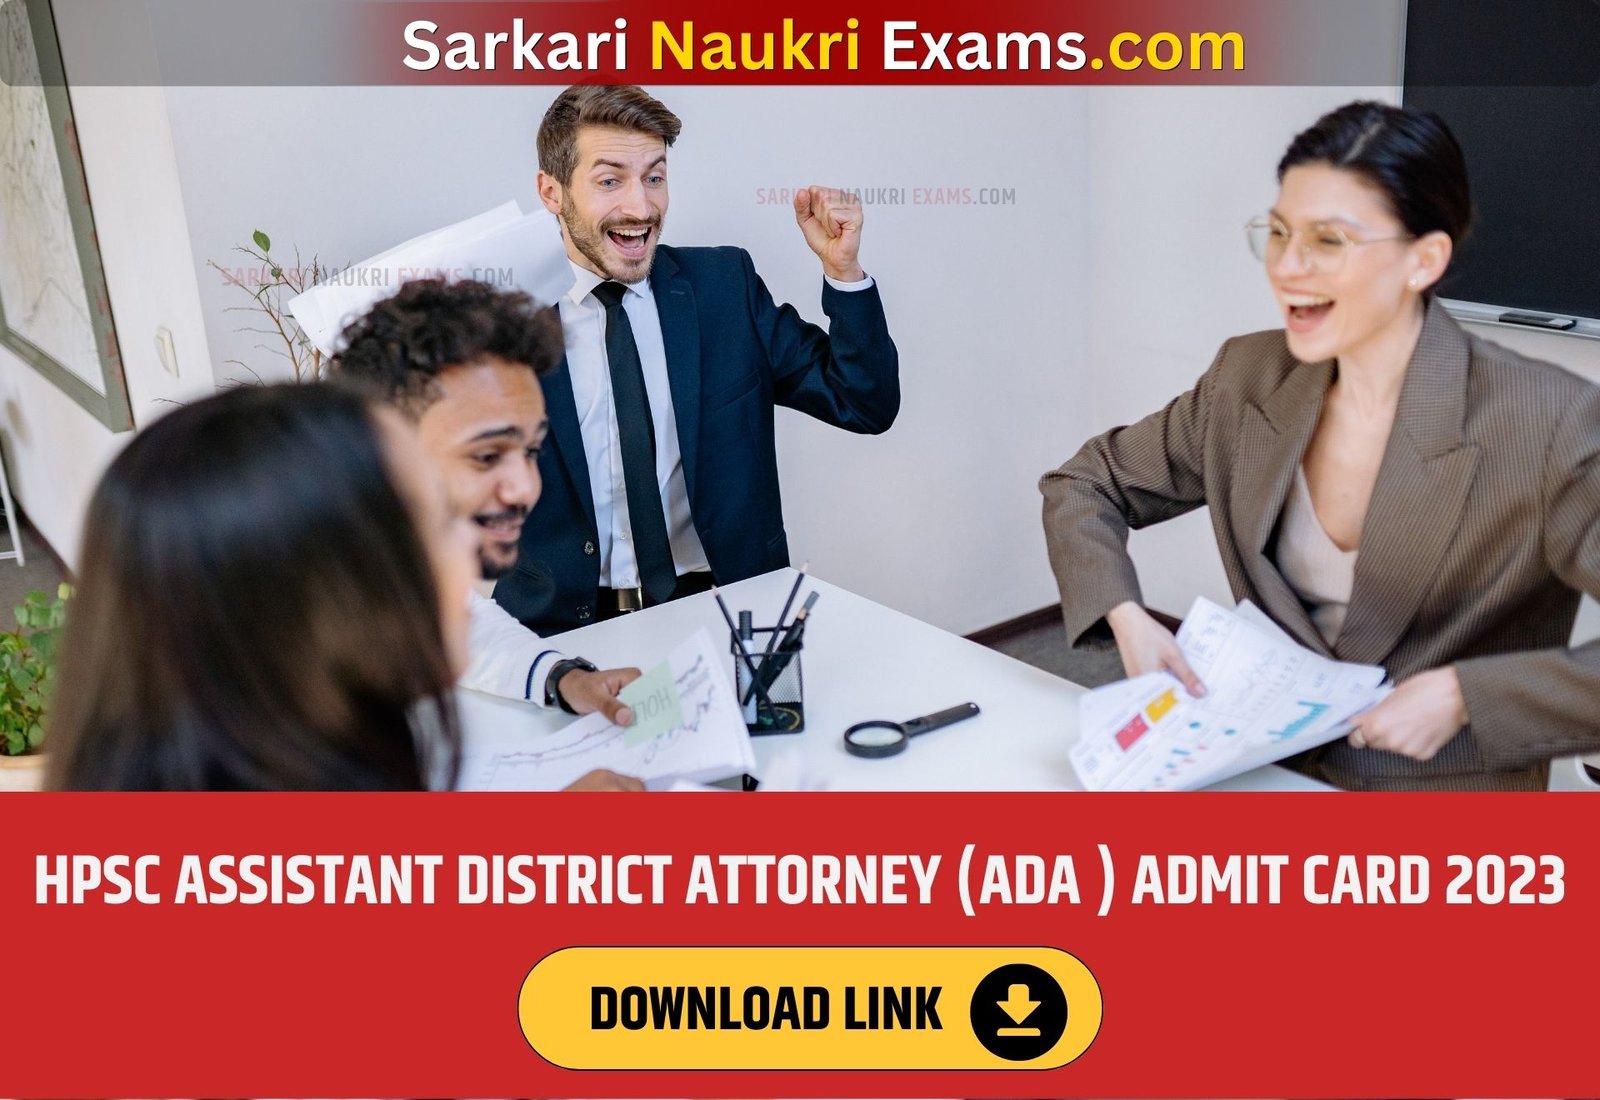 HPSC Assistant District Attorney (ADA ) Admit Card 2023 | Download Link, Exam Date